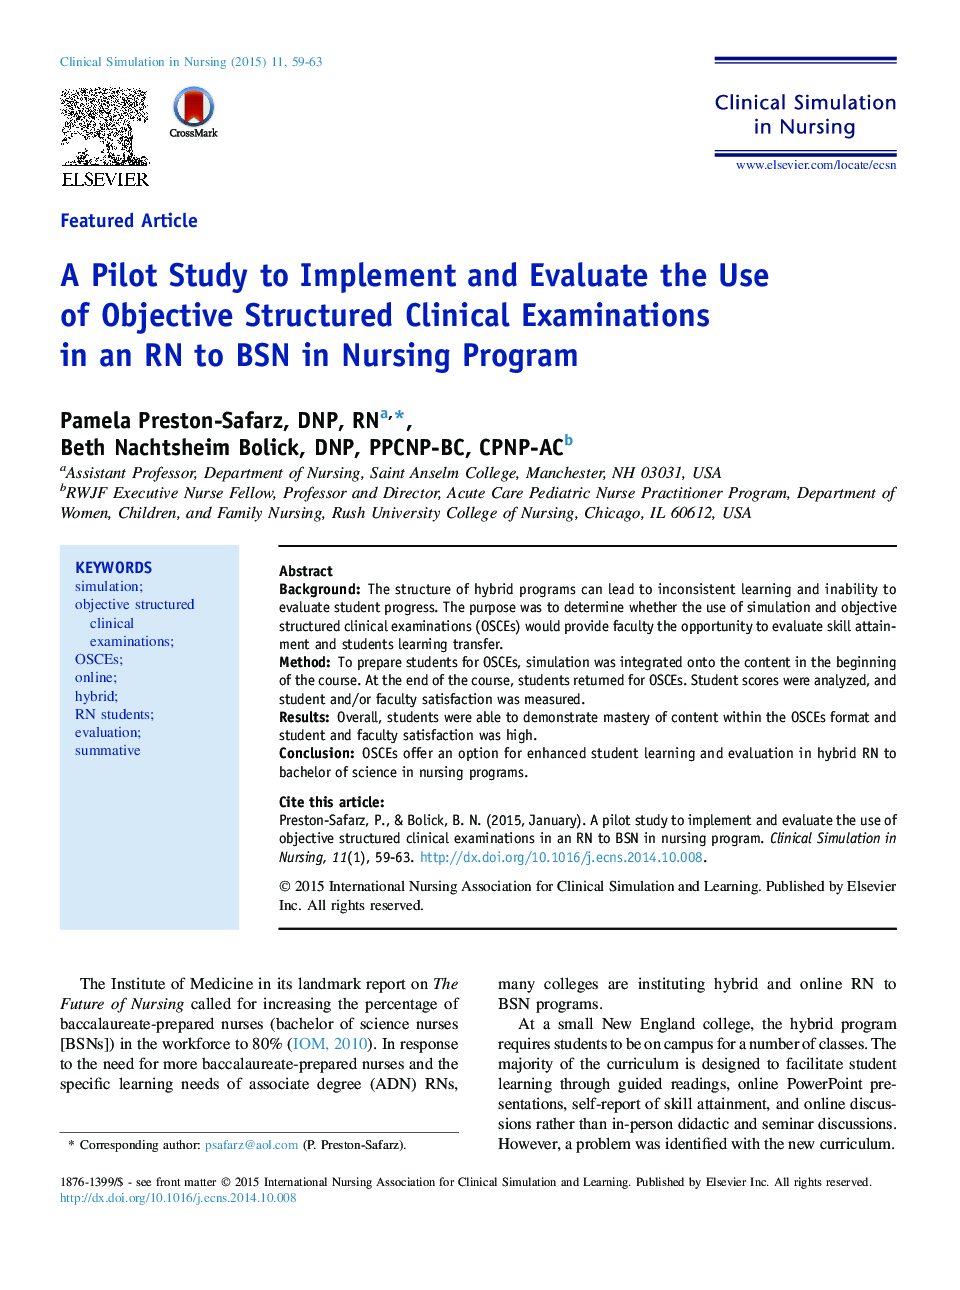 A Pilot Study to Implement and Evaluate the Use of Objective Structured Clinical Examinations in an RN to BSN in Nursing Program